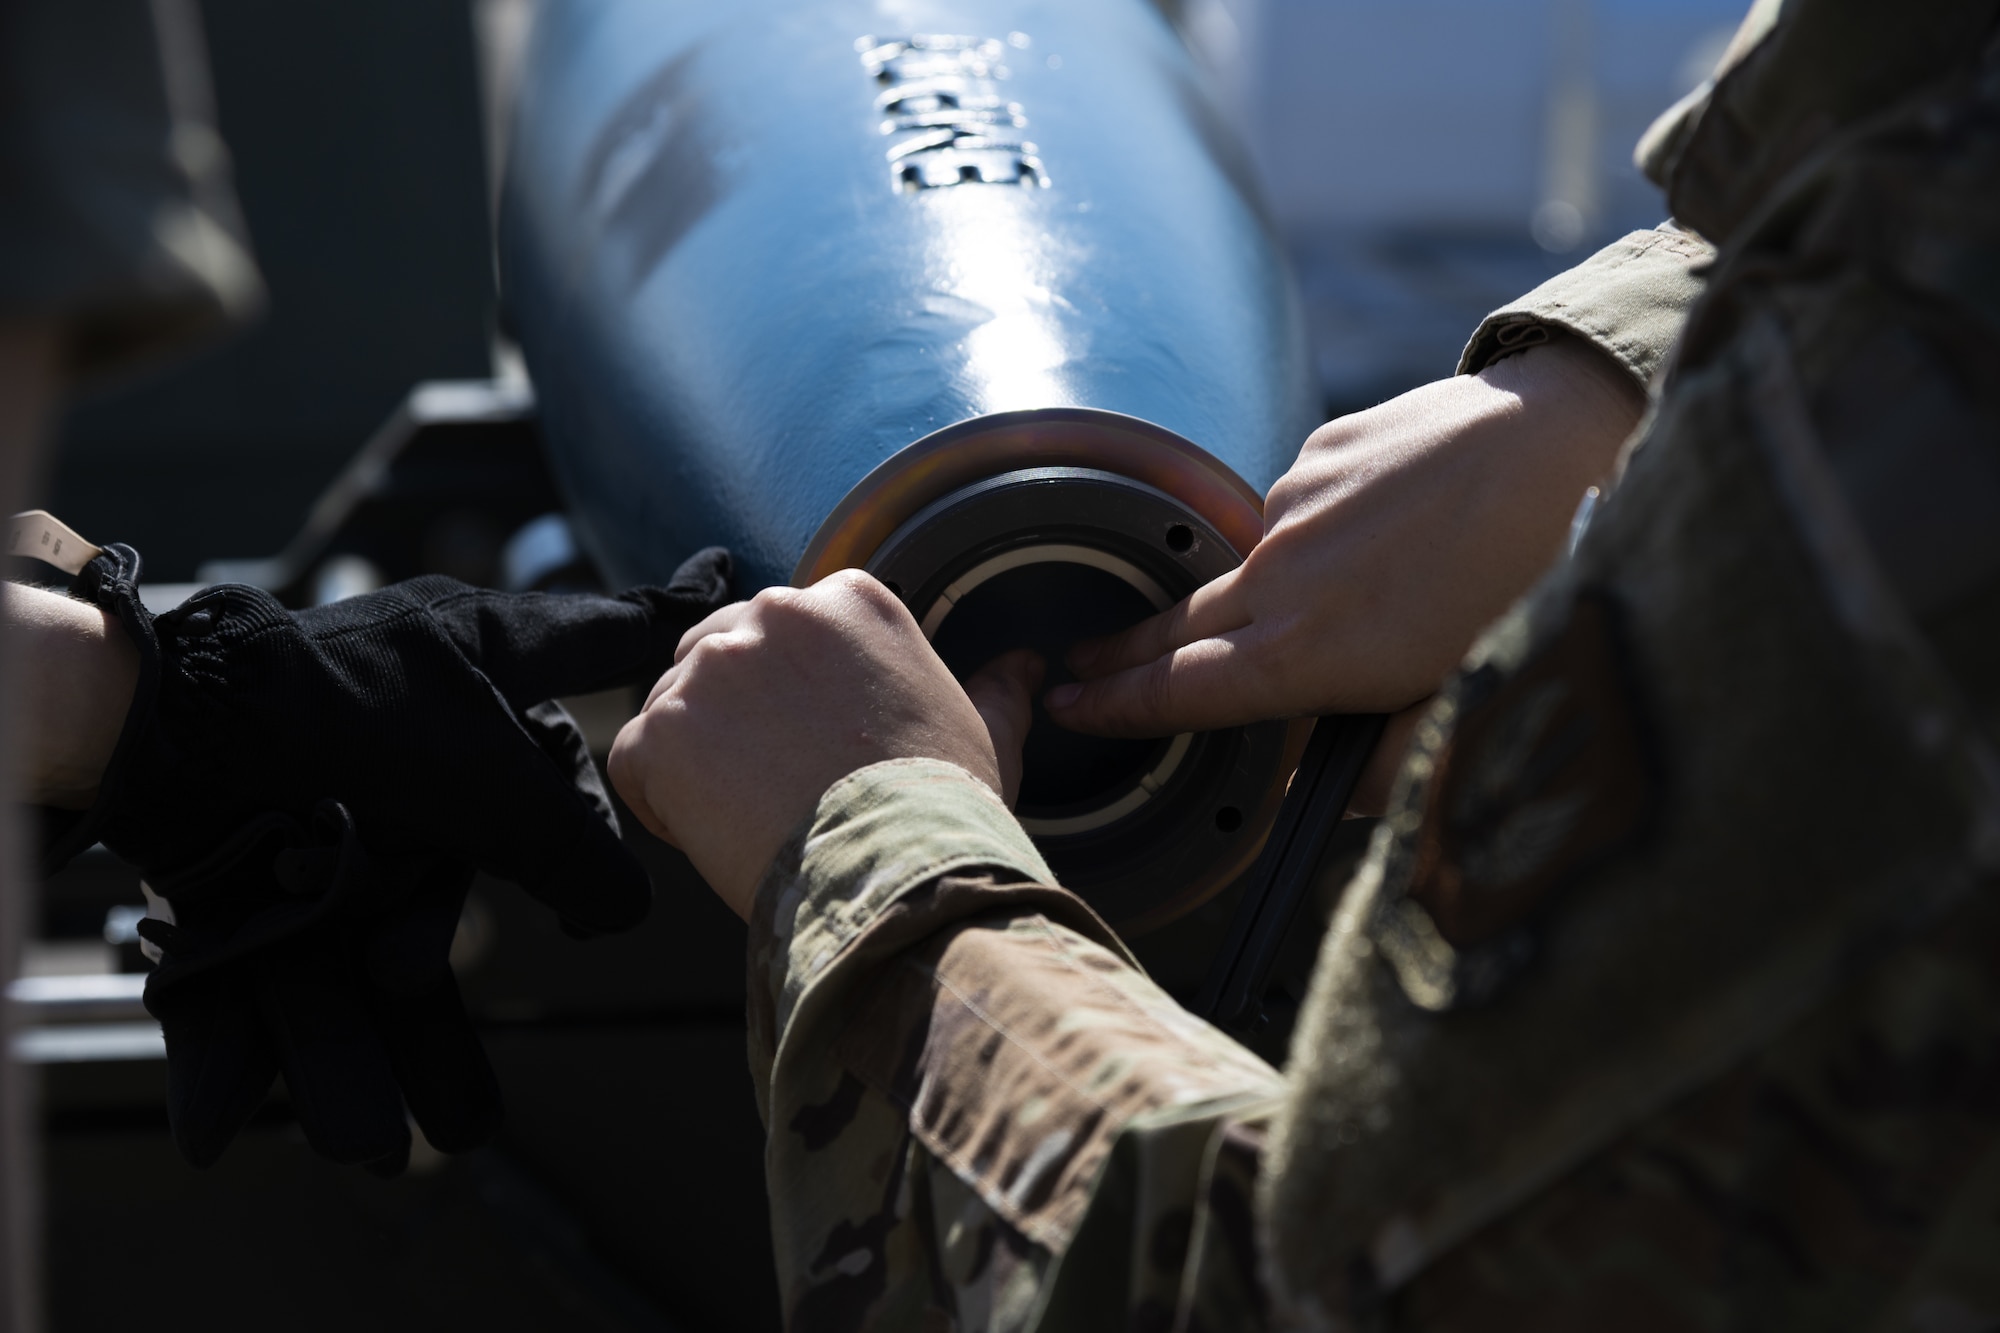 U.S. Air Force Capt. Jacqueline Pippin, 52nd Fighter Wing chaplain, helps assemble a GBU-12 inert bomb used for training at Kallax Air Base, Sweden, June 7, 2021. During training exercises like the Arctic Challenge Exercise 2021, Participation in multinational exercises like Arctic Challenge 21 enhances our professional relationships and improves overall coordination with allies and partner militaries during times of crisis. (U.S. Air Force photo by Senior Airman Ali Stewart)